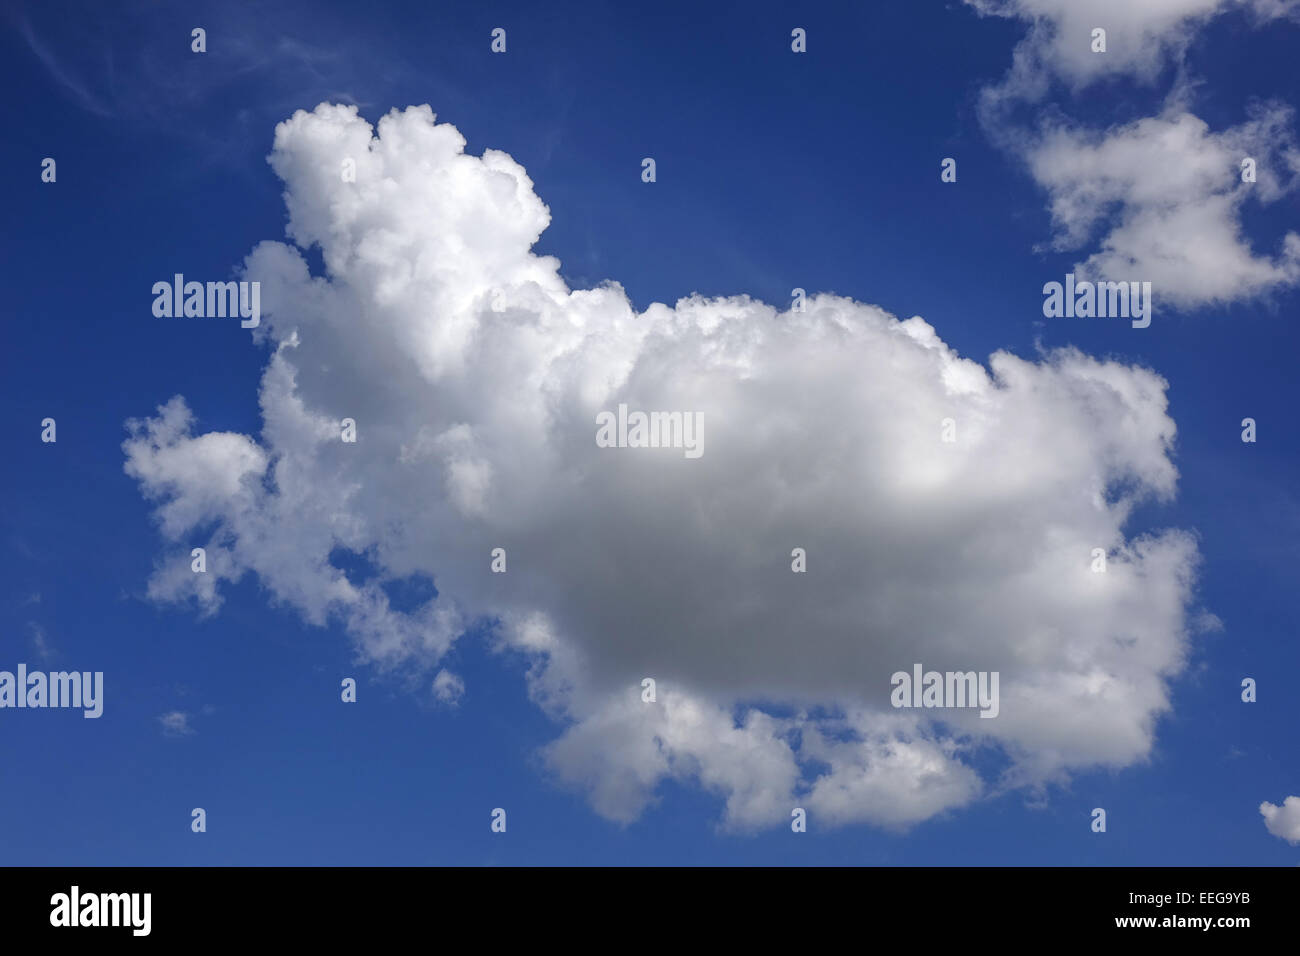 Cumuluswolken am blauen Himmel, Cumulus clouds against a blue sky, .blue and white, Cirrocumulus, cloud, formations, formation, Stock Photo